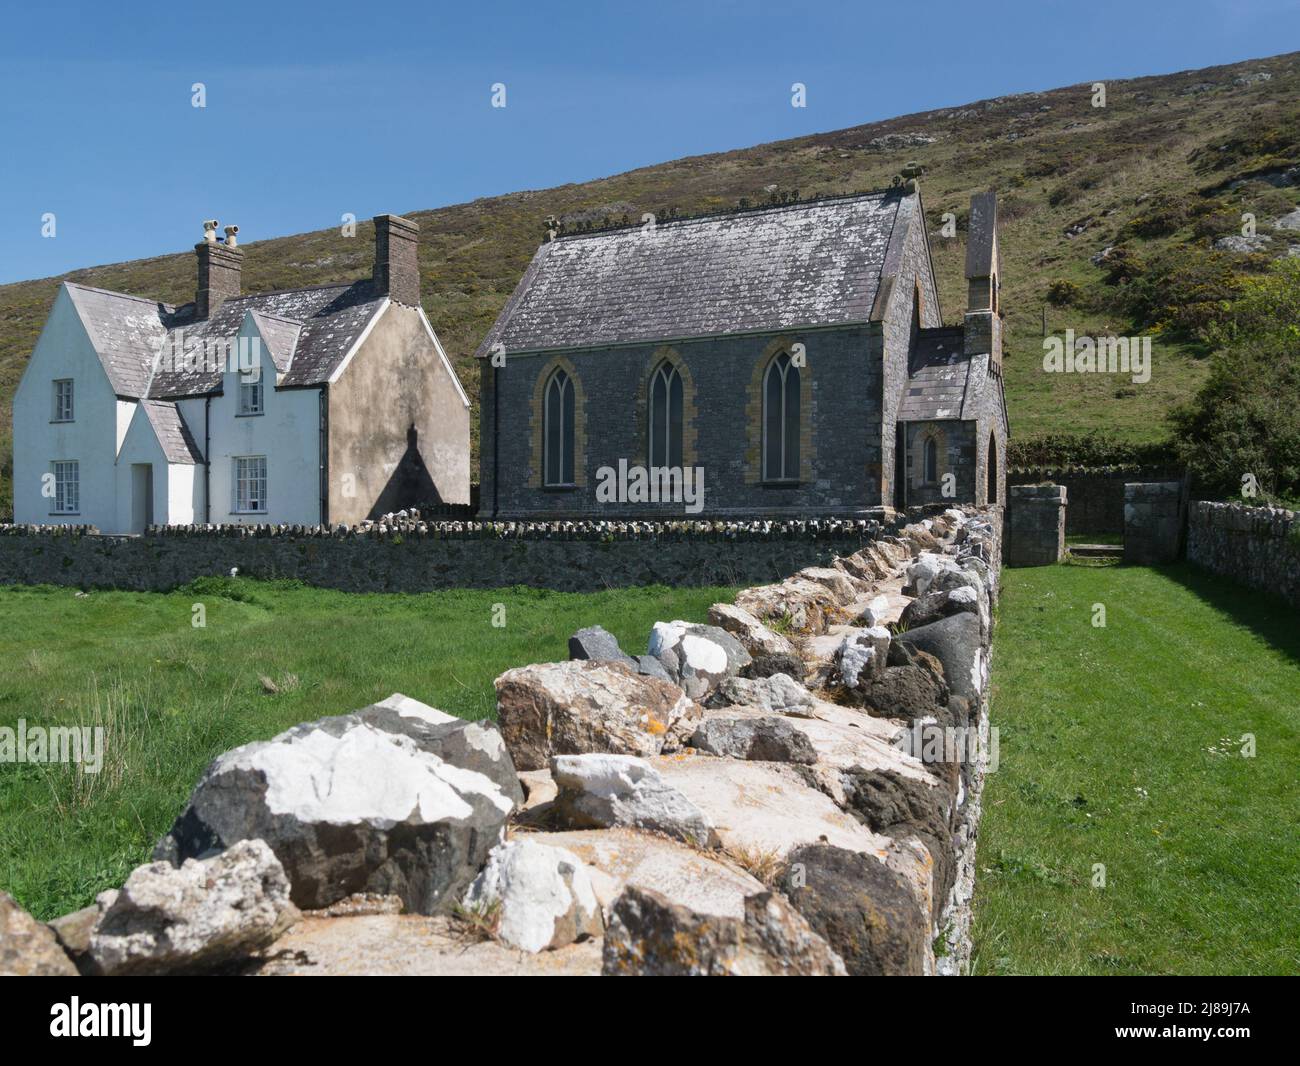 Ty Capel Bardsey Island Gwynedd Wales UK substantial detached house used as minister's house. The Rev John 'Enlli' Williams and his wife lived here du Stock Photo